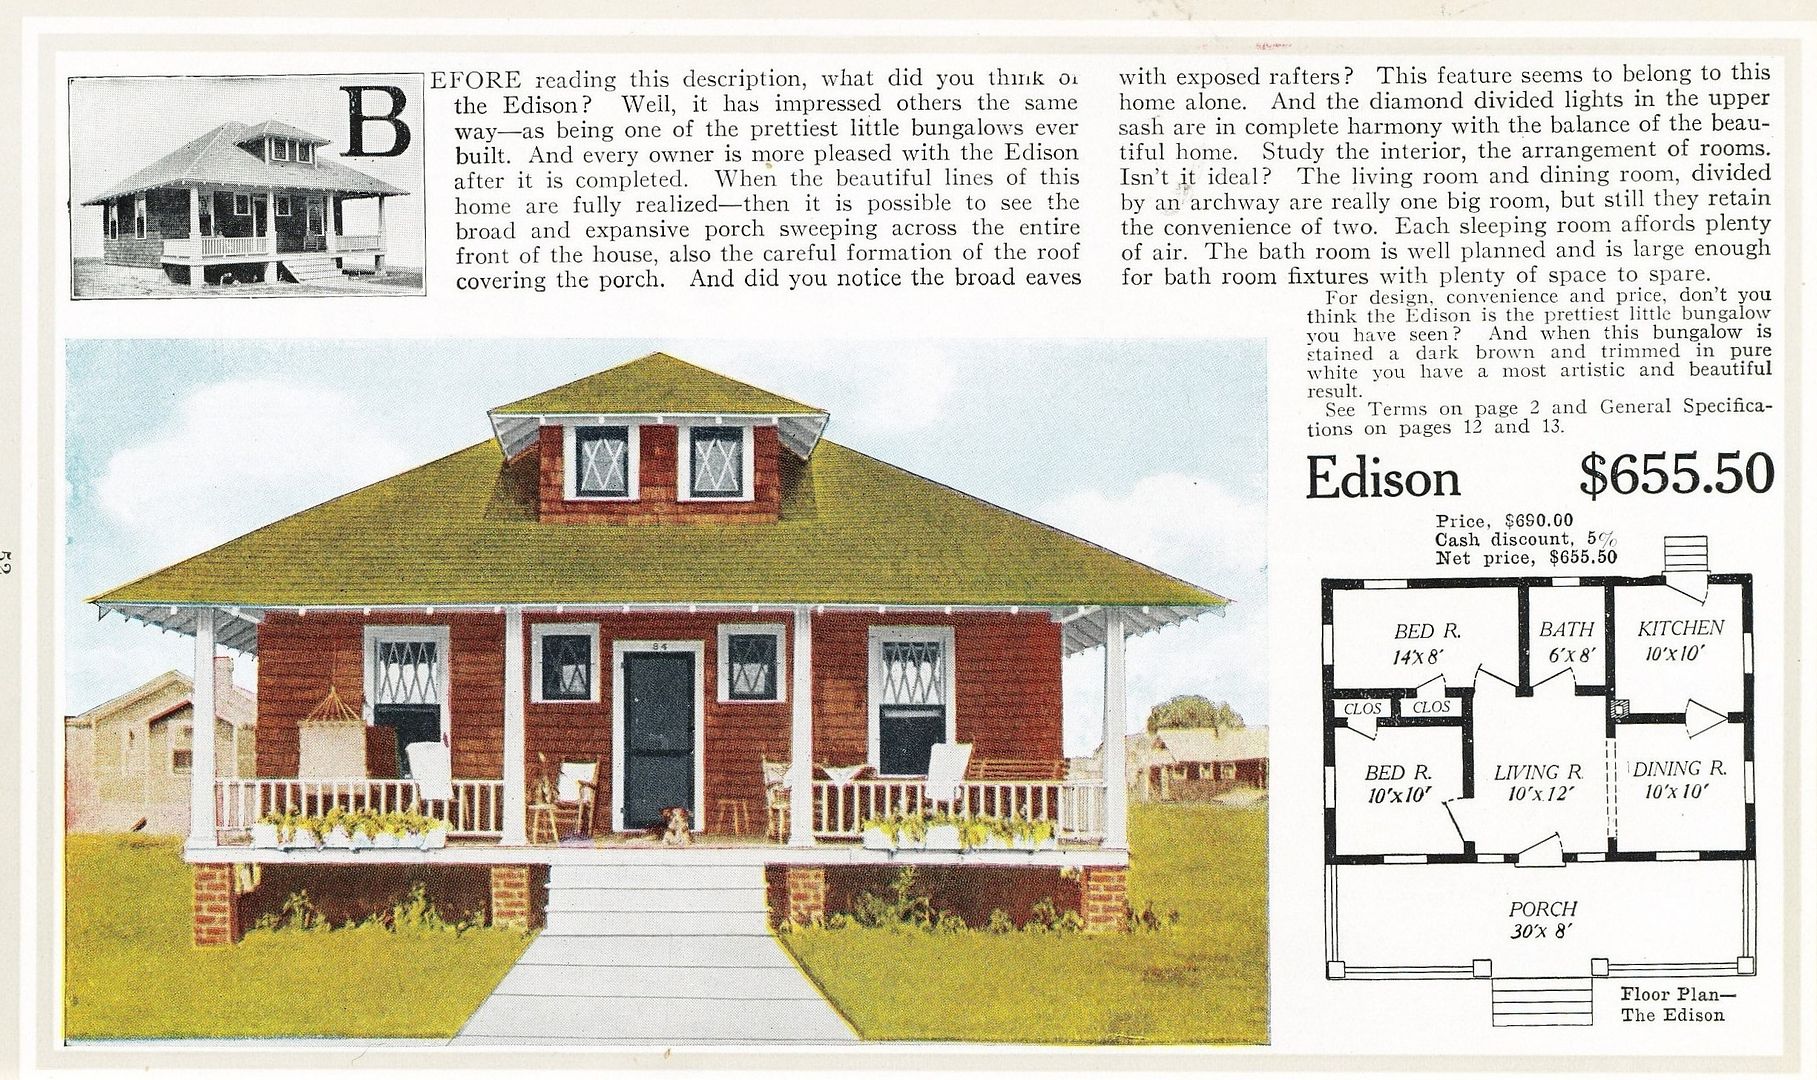 The Aladdin Edison was a very modest, simple house.